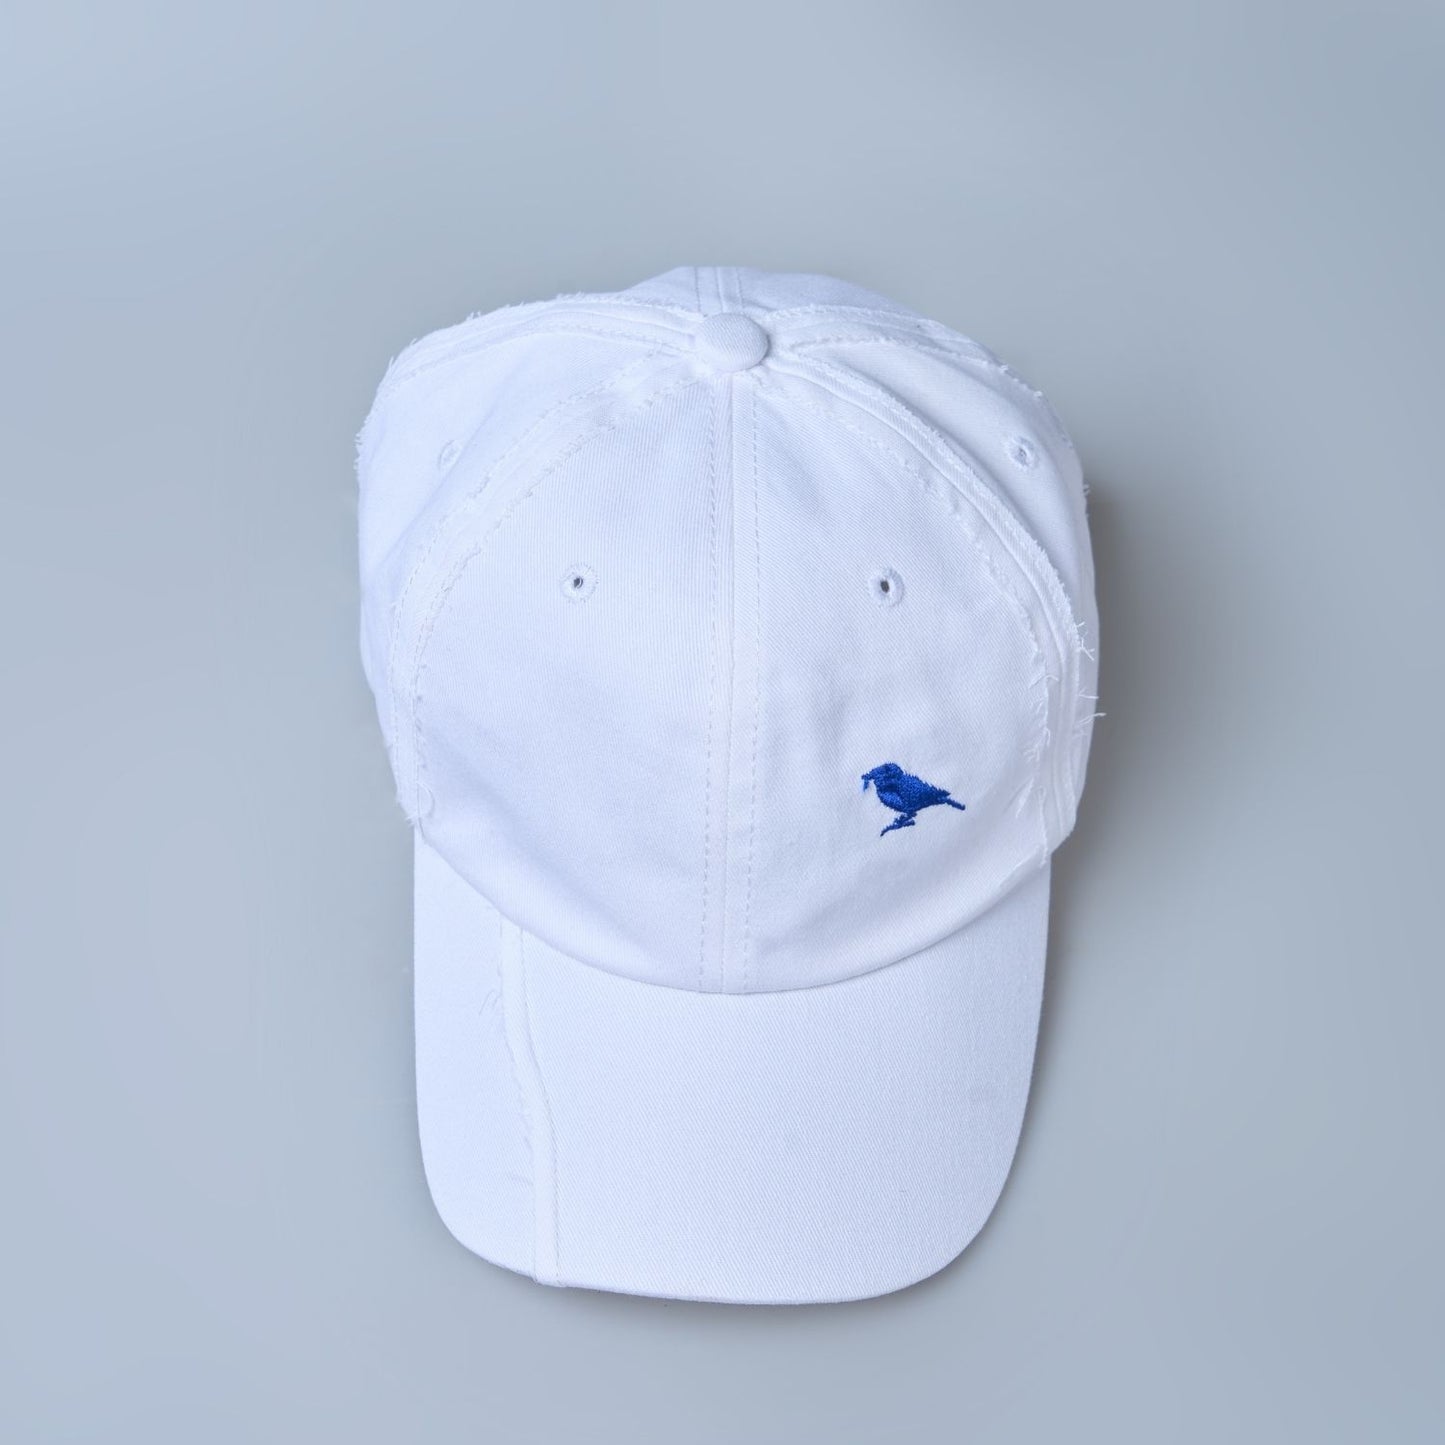 white colored, wide brim polo cap for men with adjustable strap, up view.